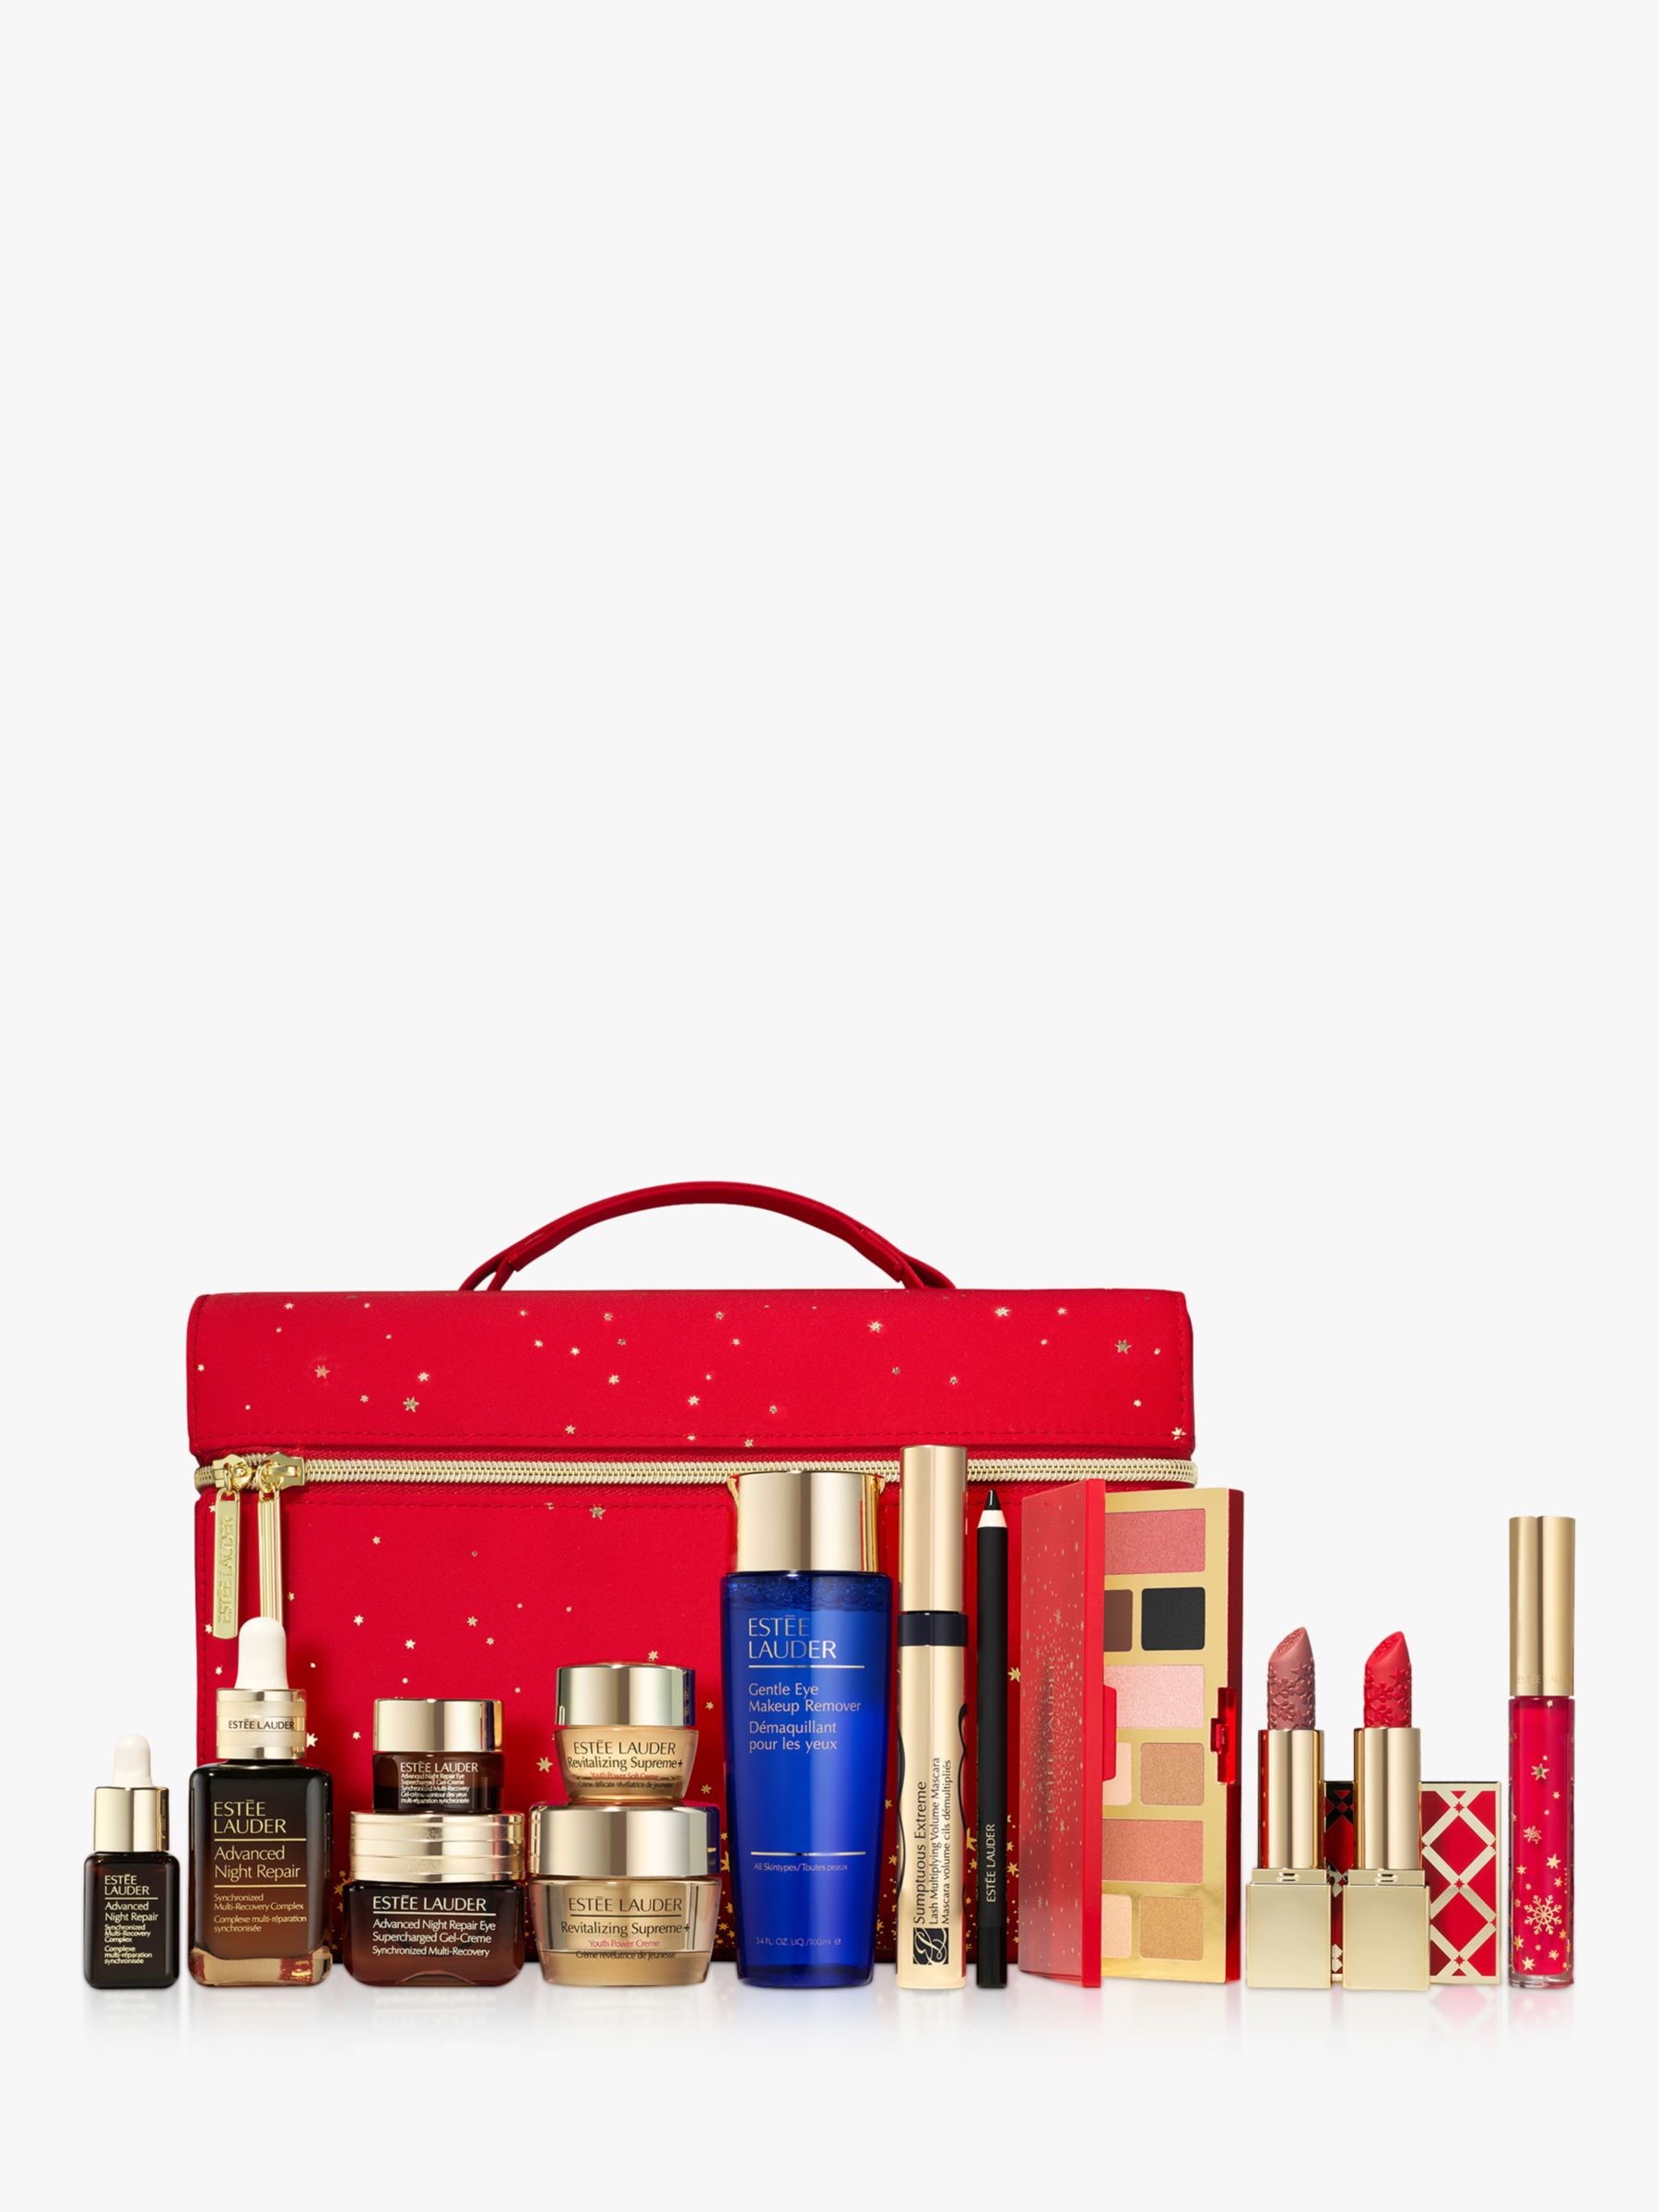 Estee Lauder: Get the Ultimate Set (worth £368) for £75 when you spend £50+